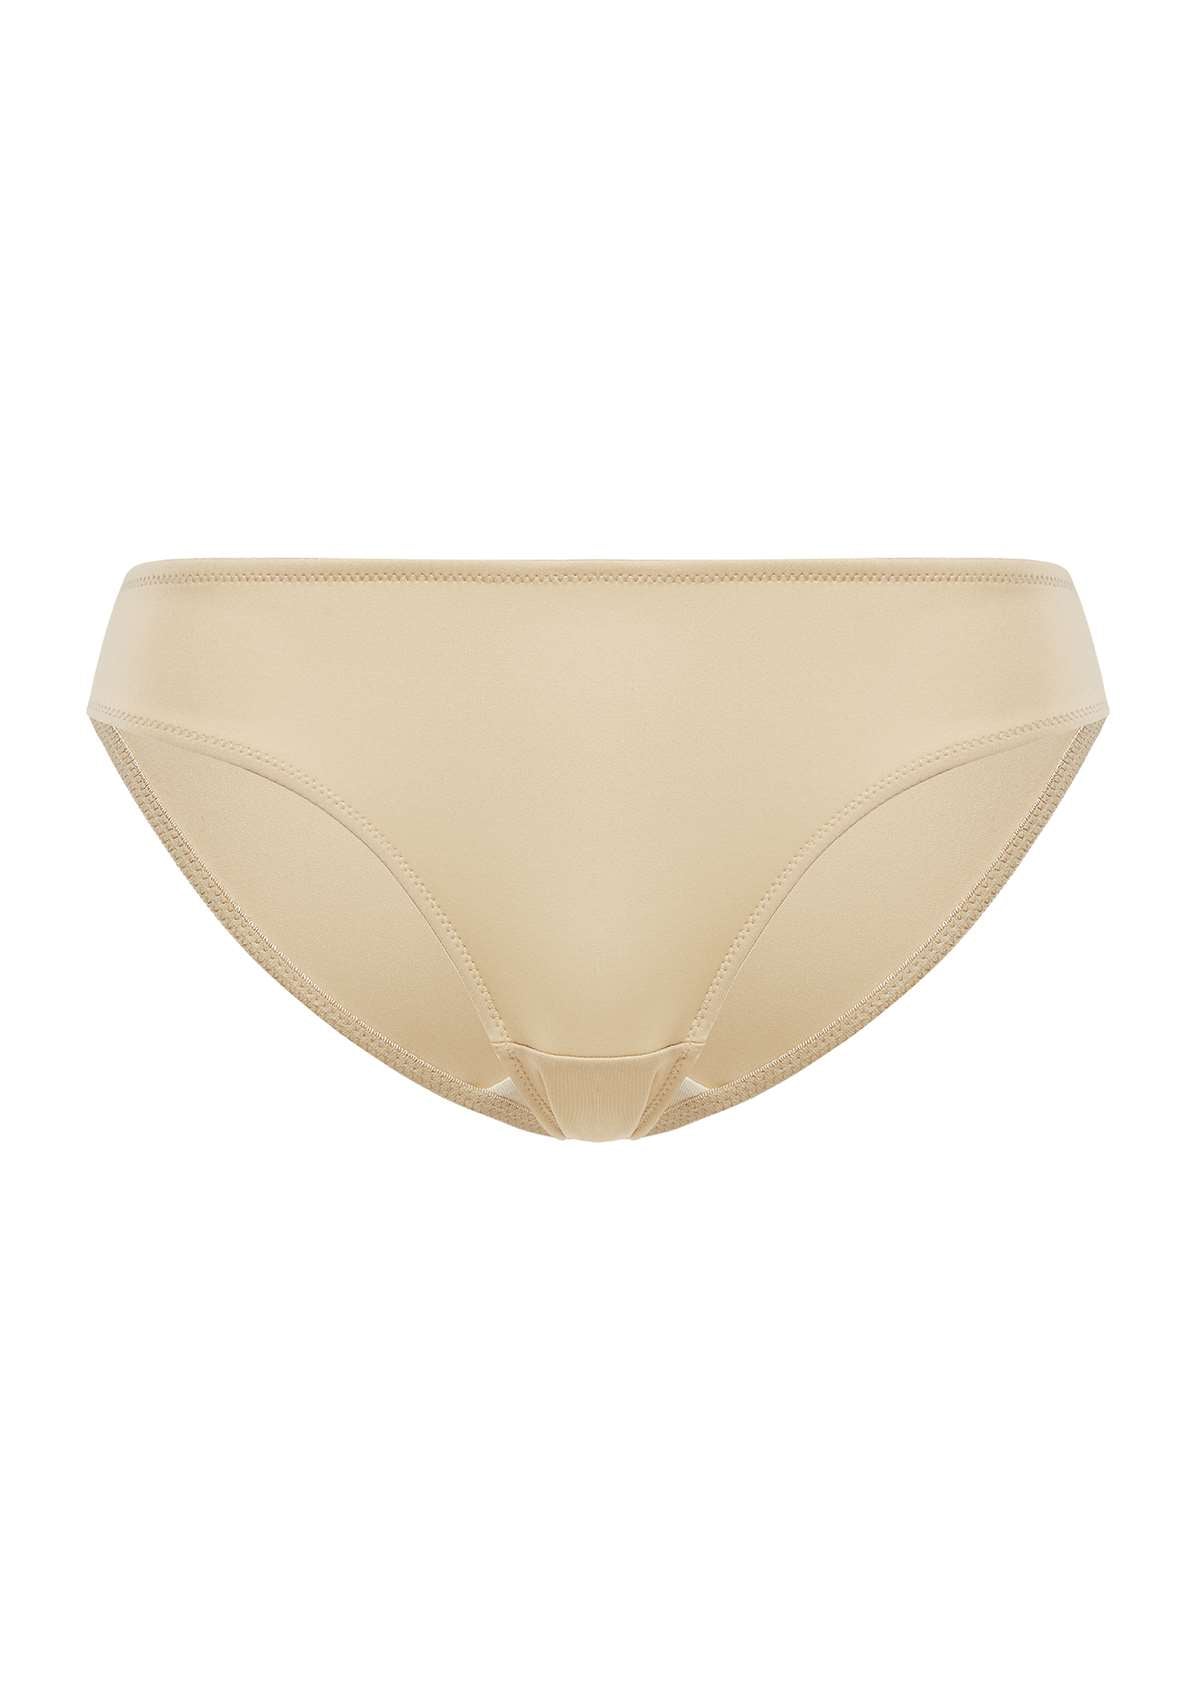 HSIA Patricia Smooth Classic Soft Stretch Panty - Everyday Comfort - XL / Beige